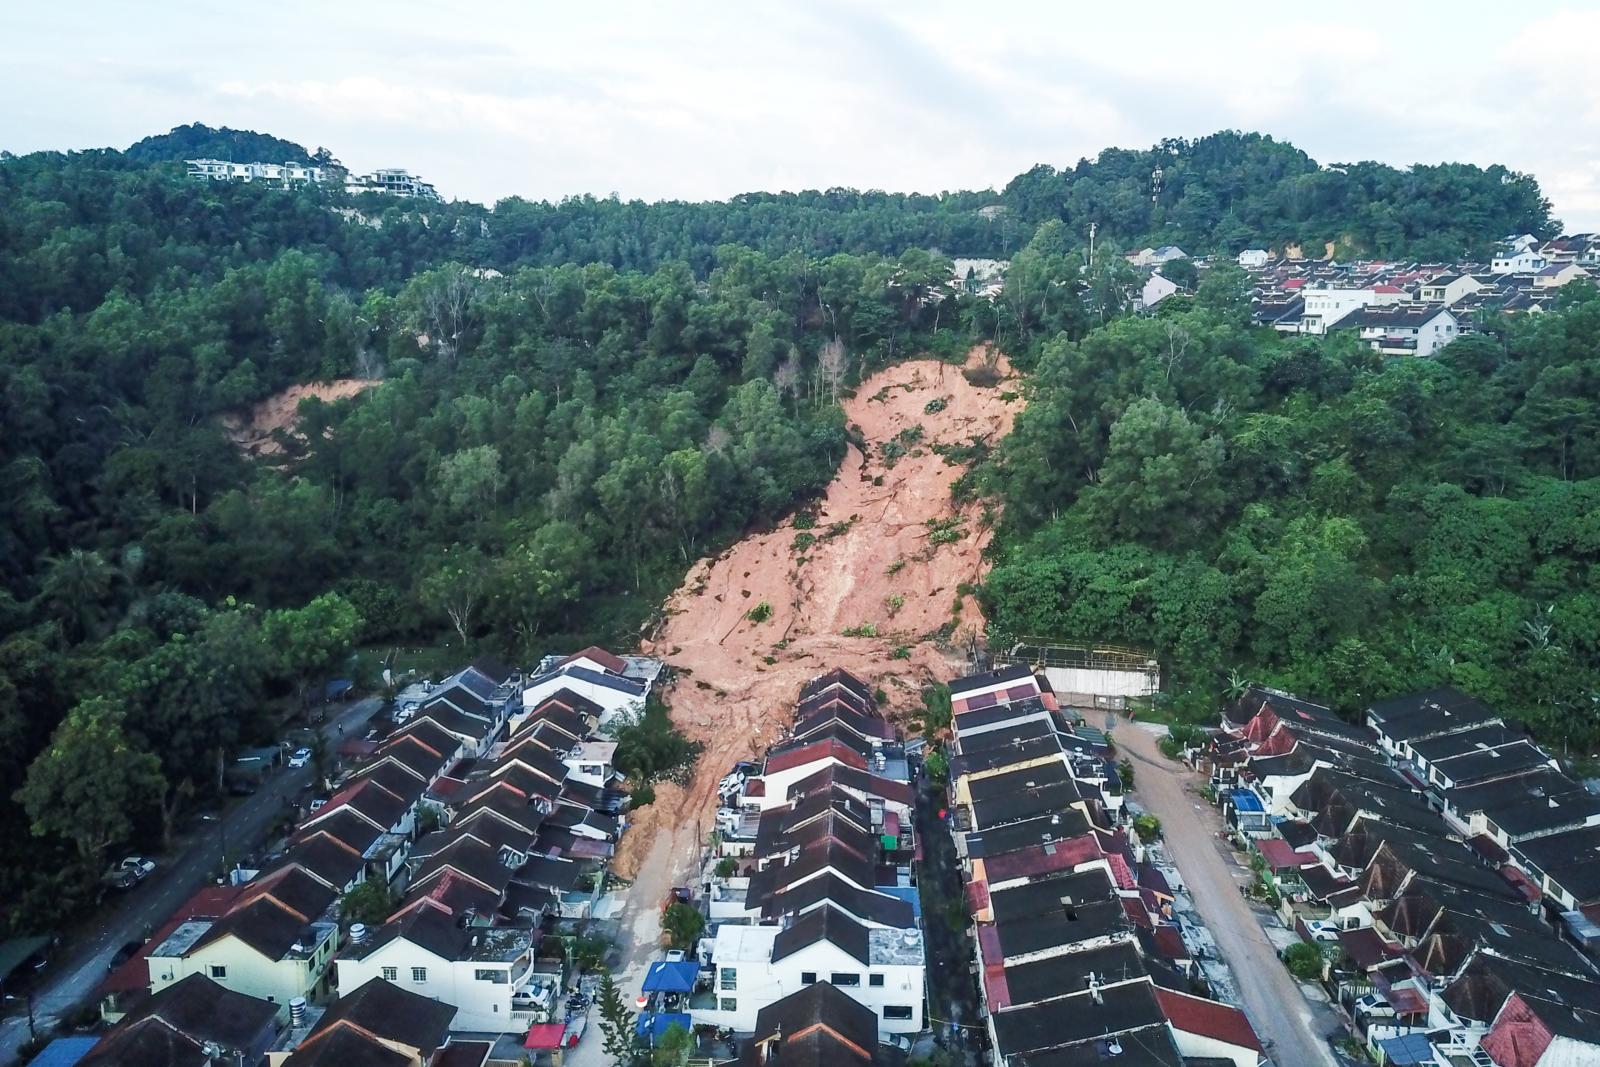 The 10 March 2022 landslide at Ampang in Malaysia.